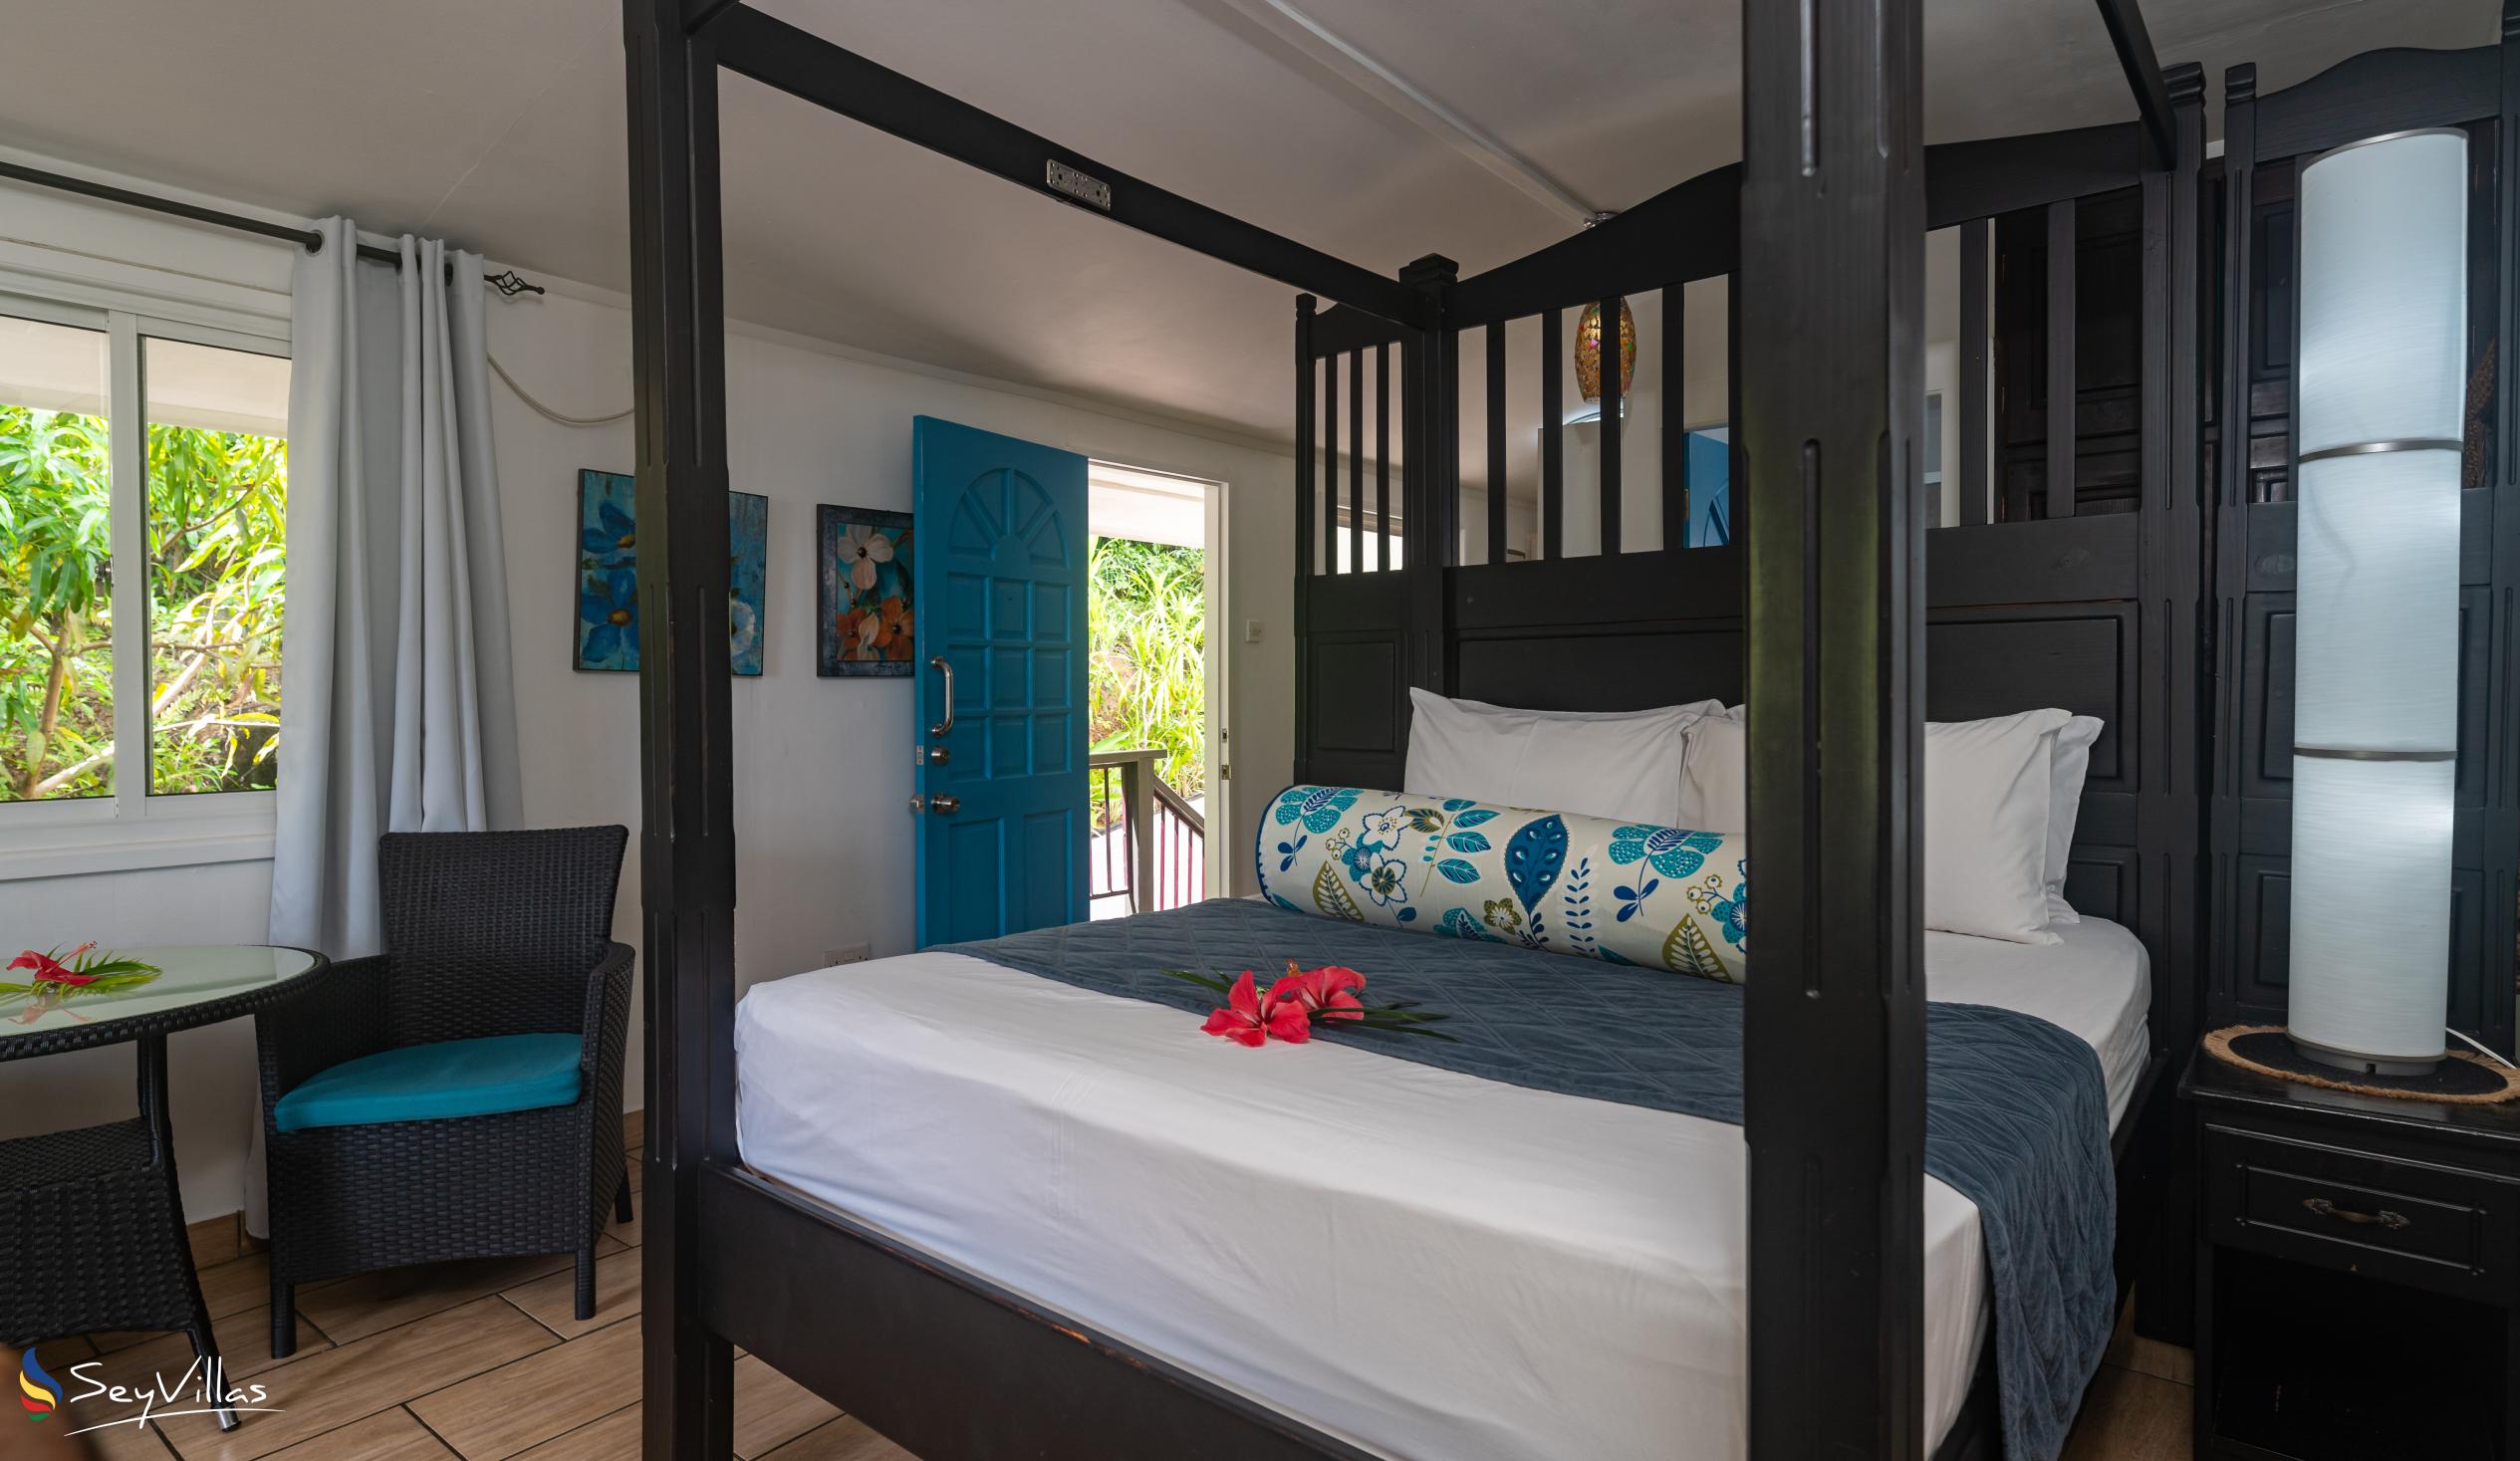 Foto 78: Stephna Residence - Suite Deluxe - Mahé (Seychelles)